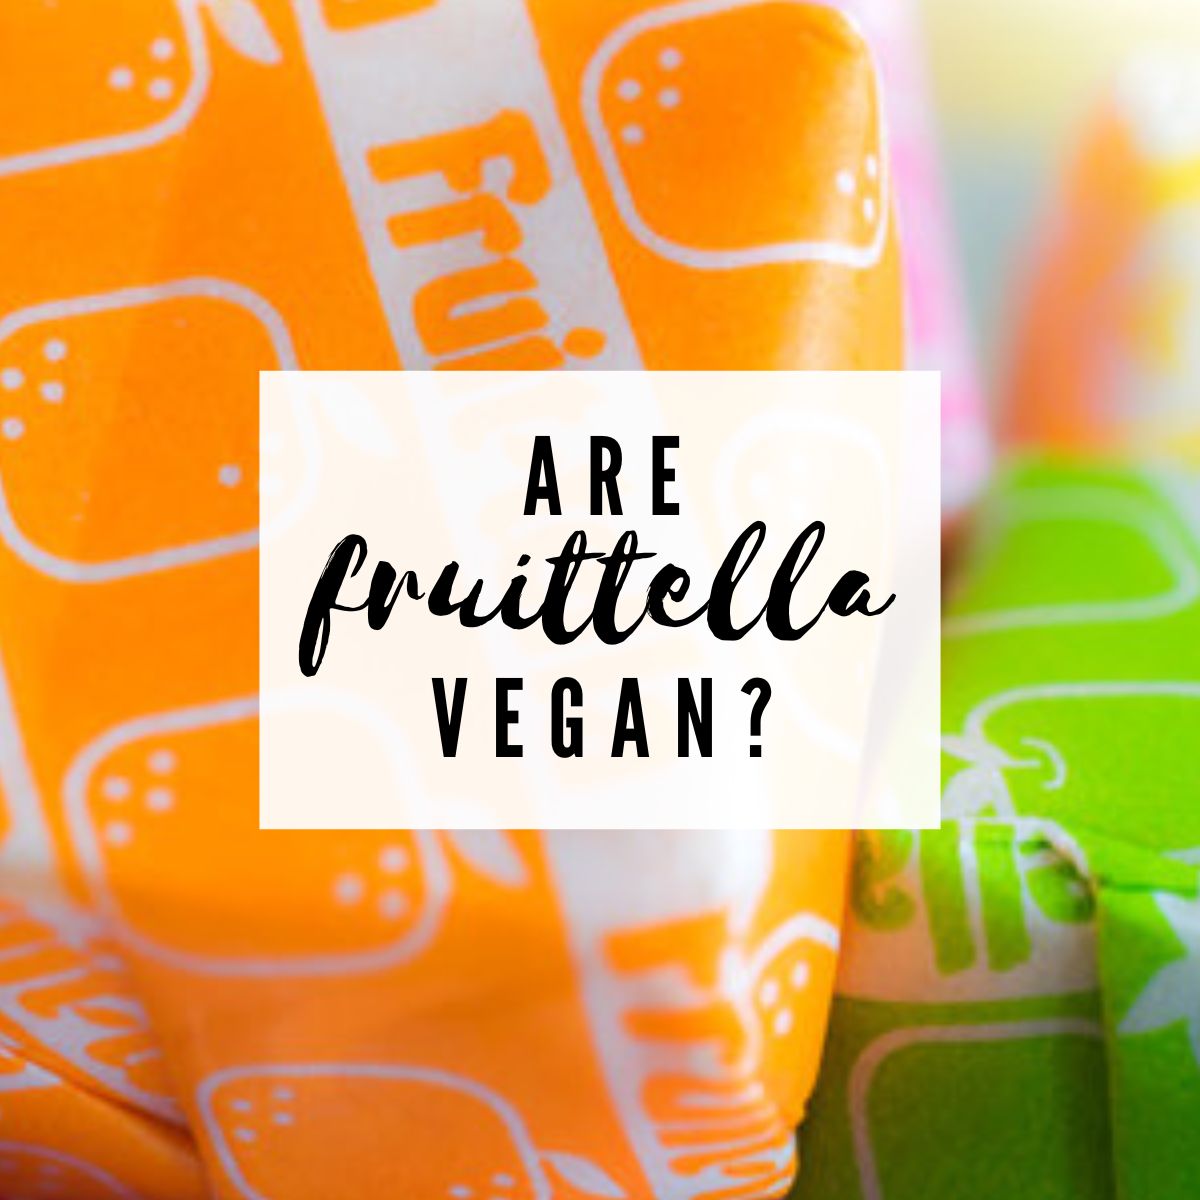 Are Fruitella vegan image of sweets with text overlay